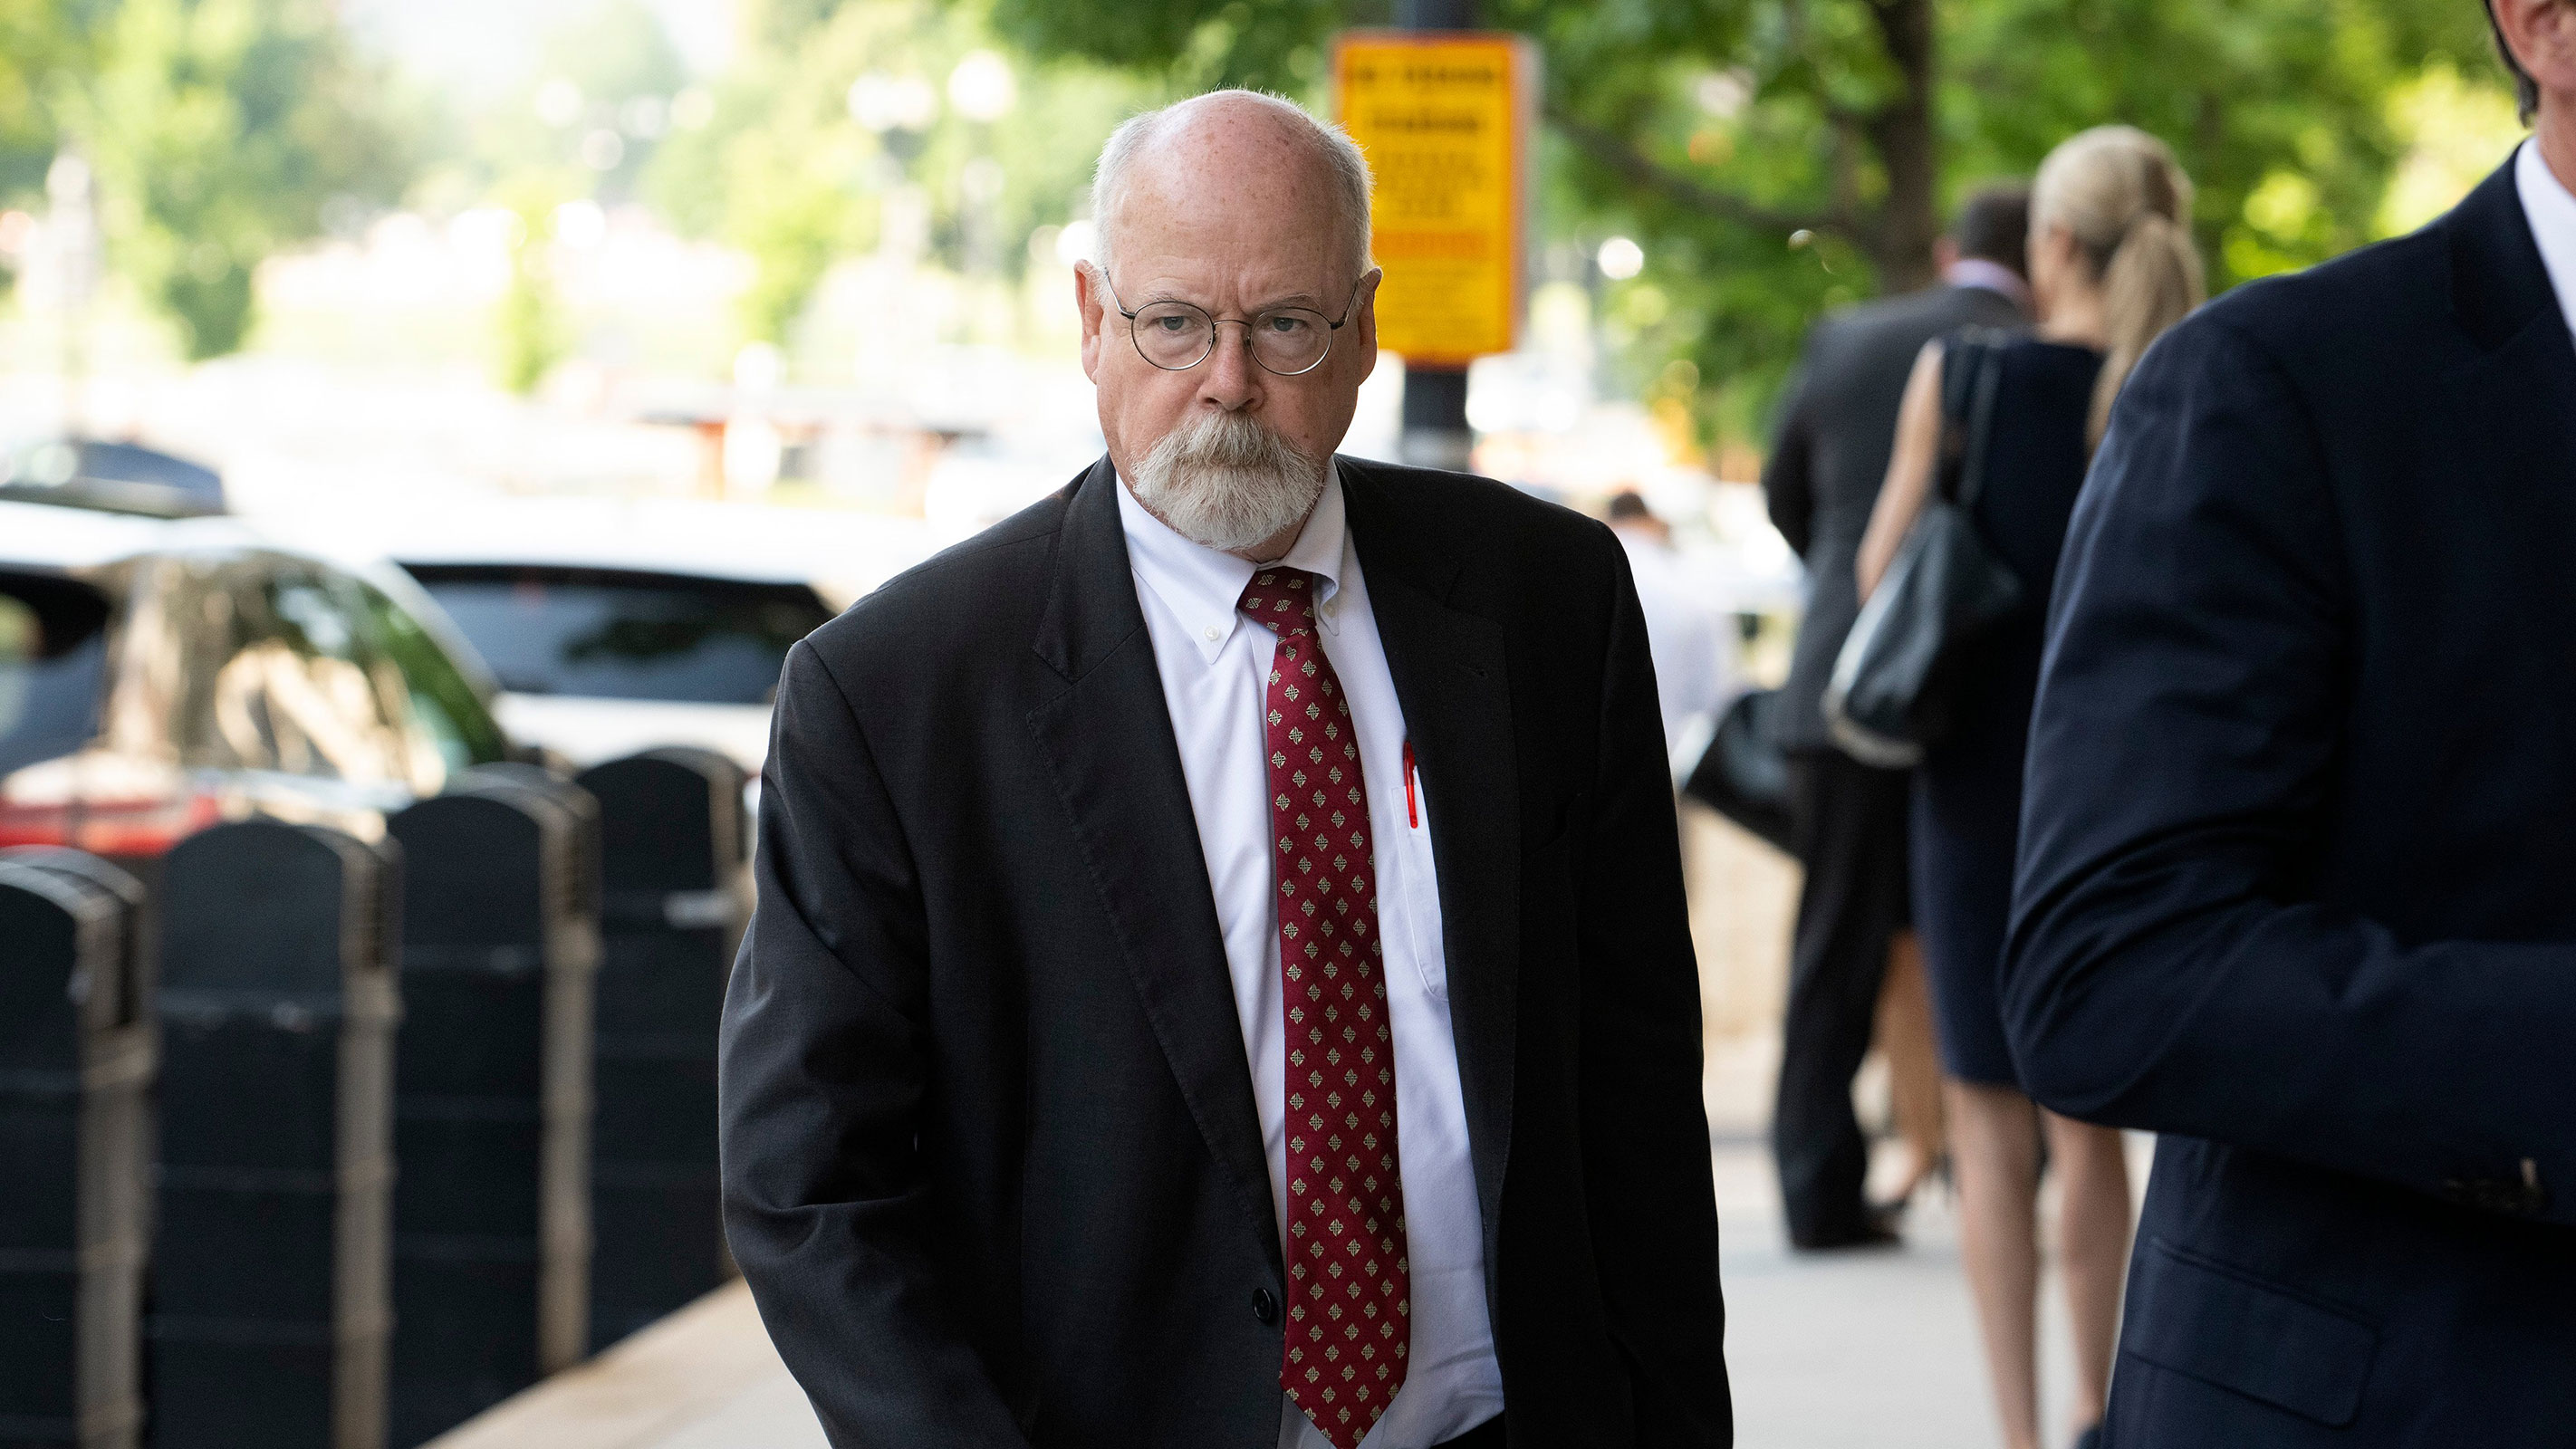 Special counsel John Durham arrives at federal court in Washington, DC, in May 2022.